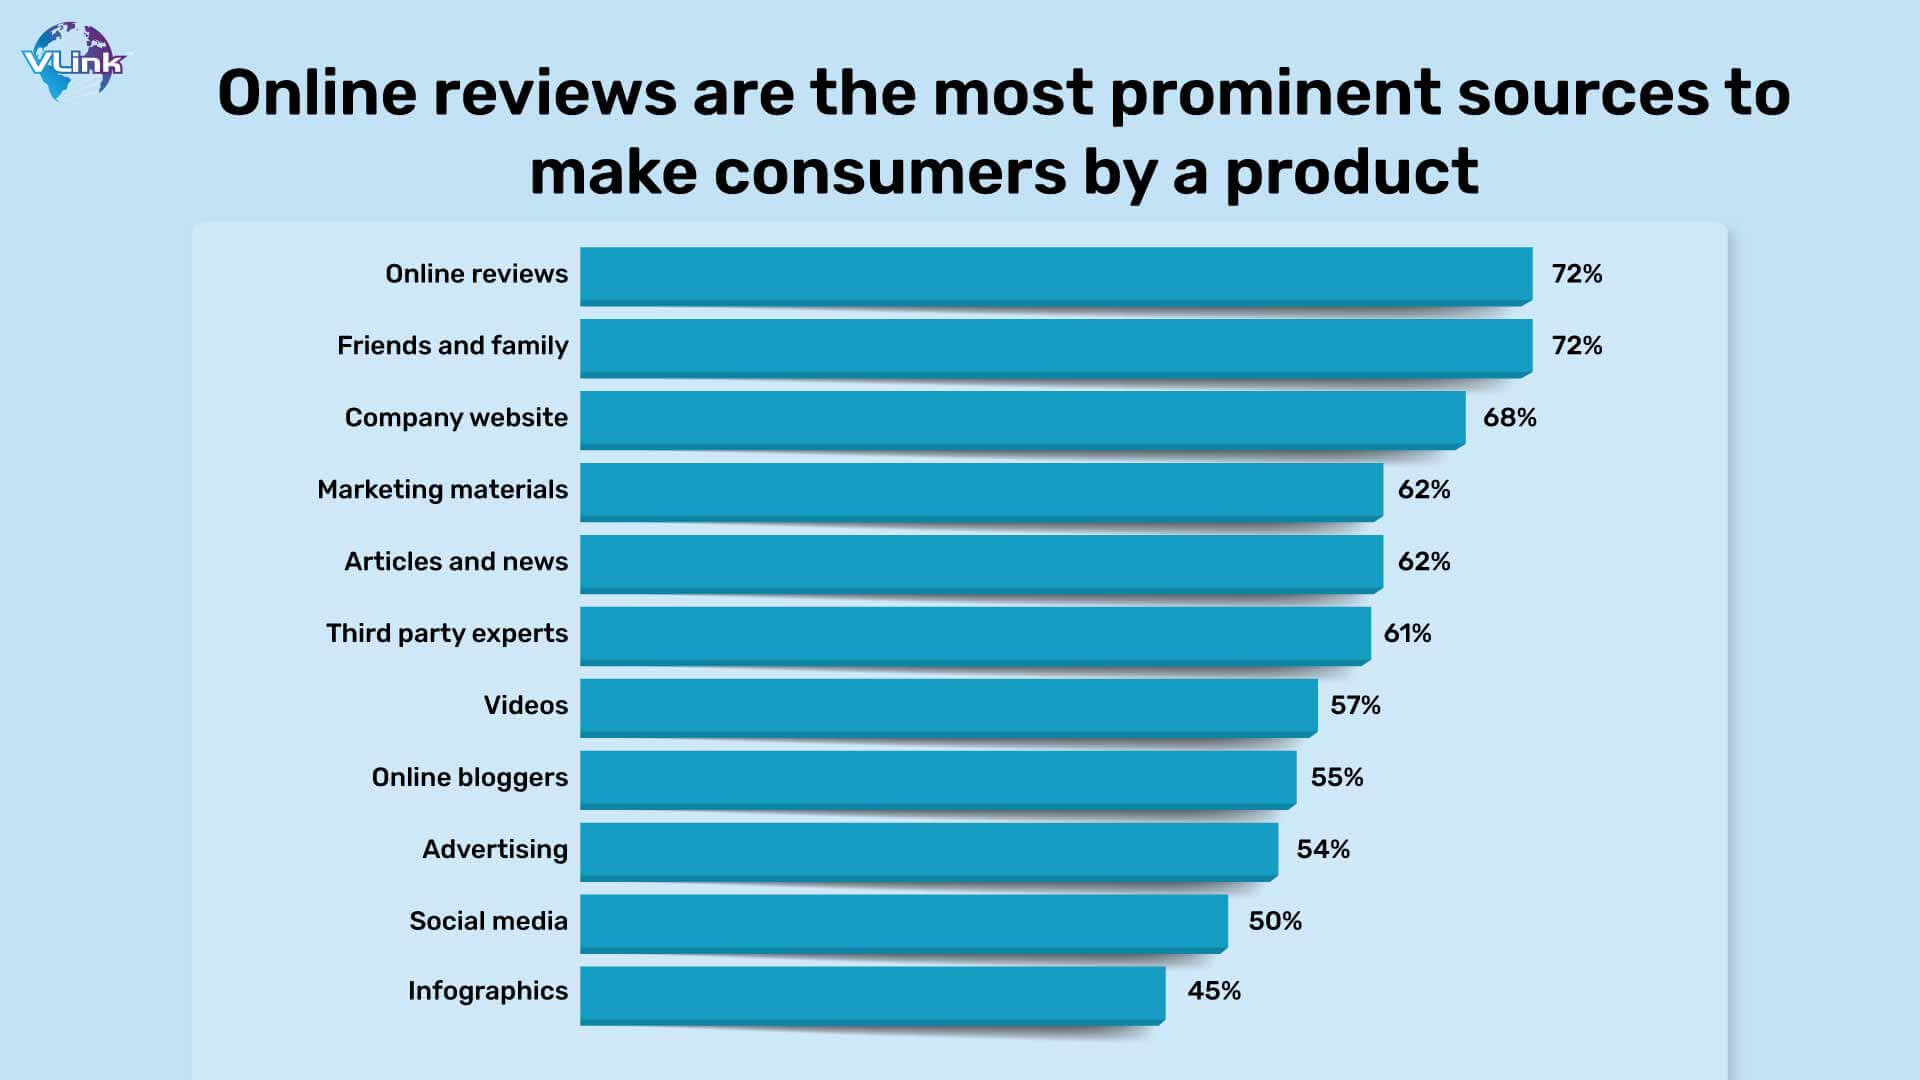 Online reviews are the most prominent sources to make consumers by a product